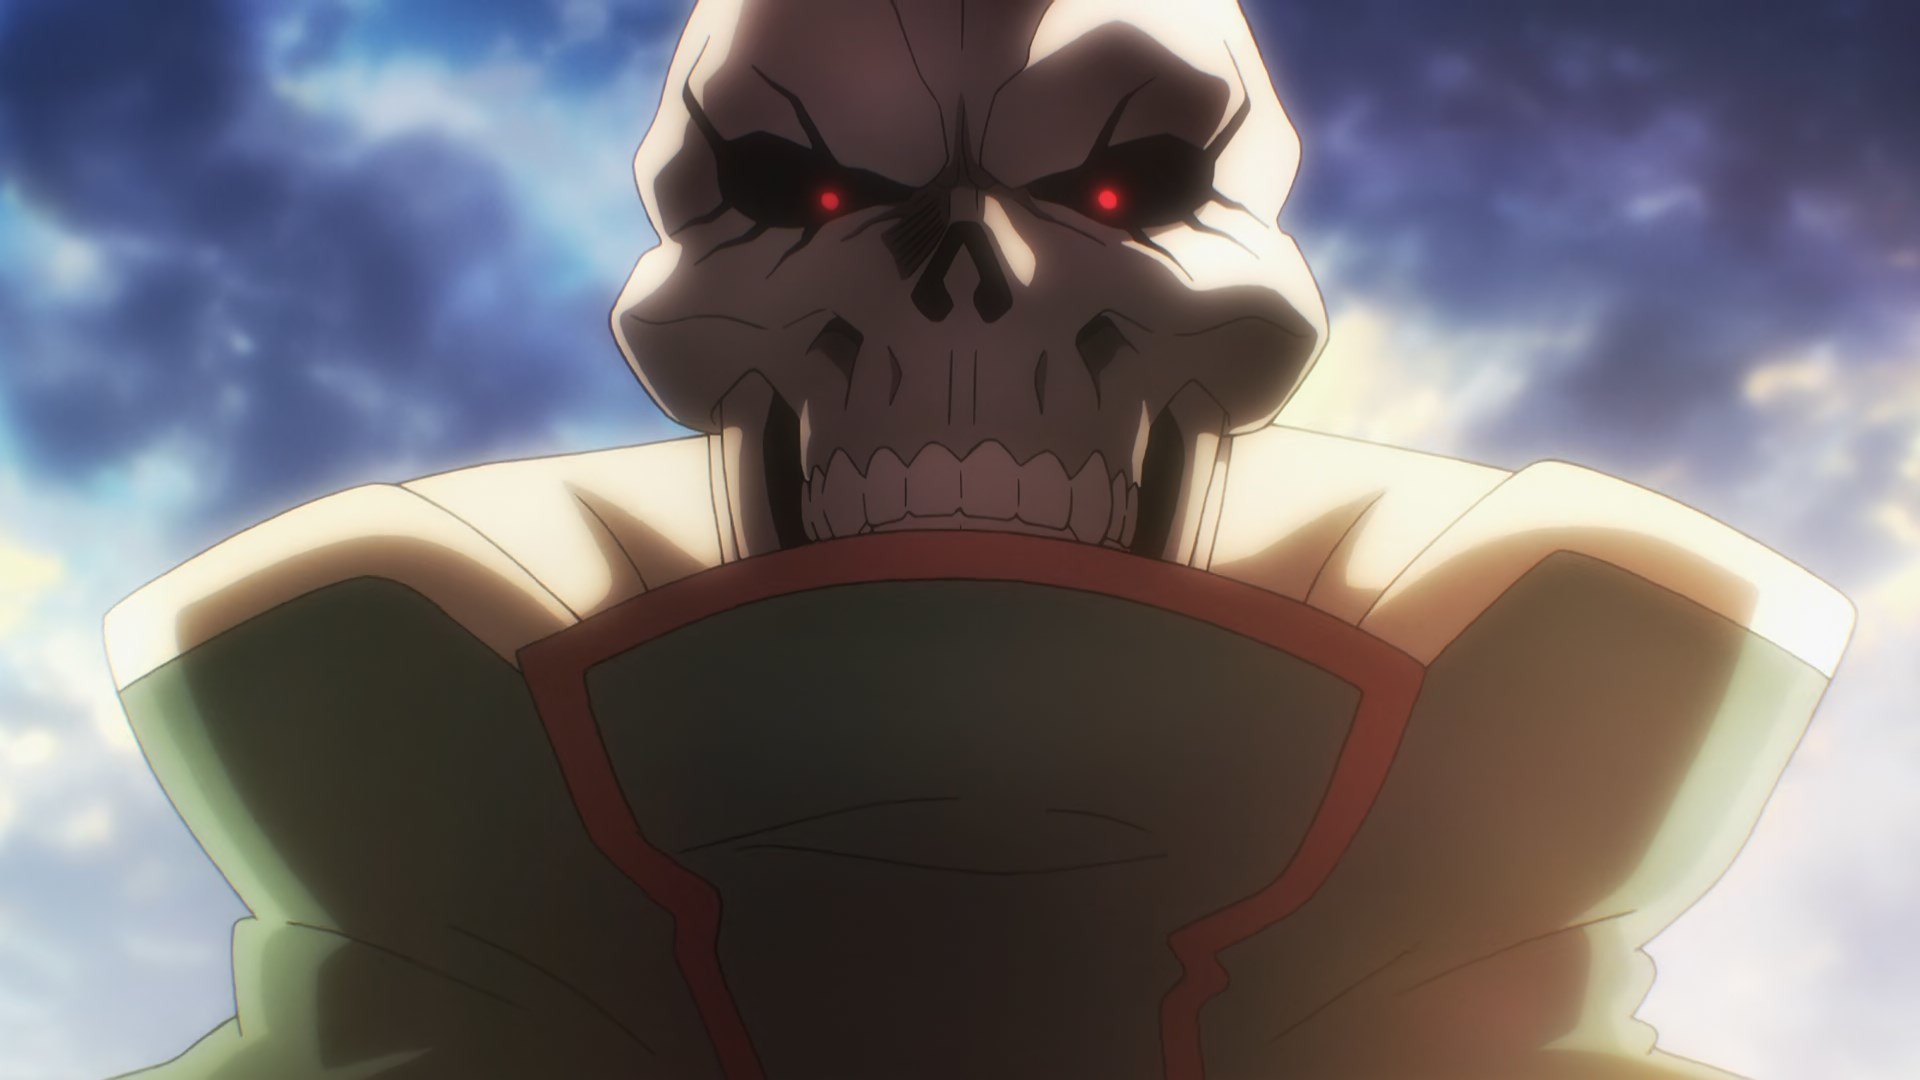 Overlord IV Episode 03, Overlord Wiki